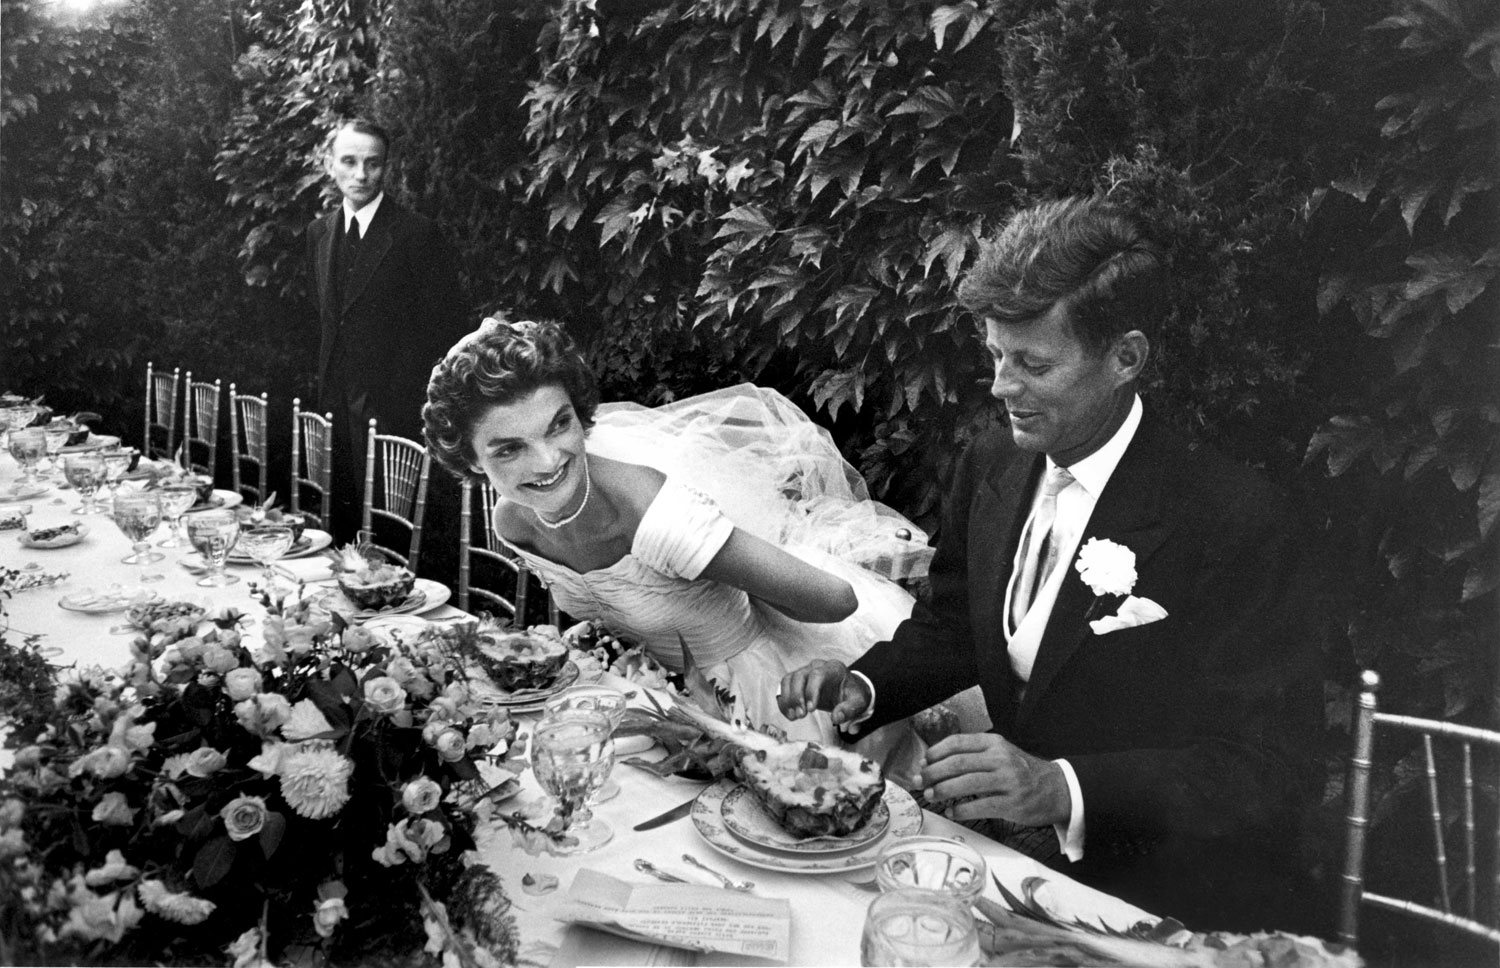 Bride and bridegroom finally sit down to lunch after the long, wearying ordeal of the receiving line. Jacqueline, whose wedding dress contained 50 yards of material, adjusts veil while her senator husband starts right in on fruit cup."